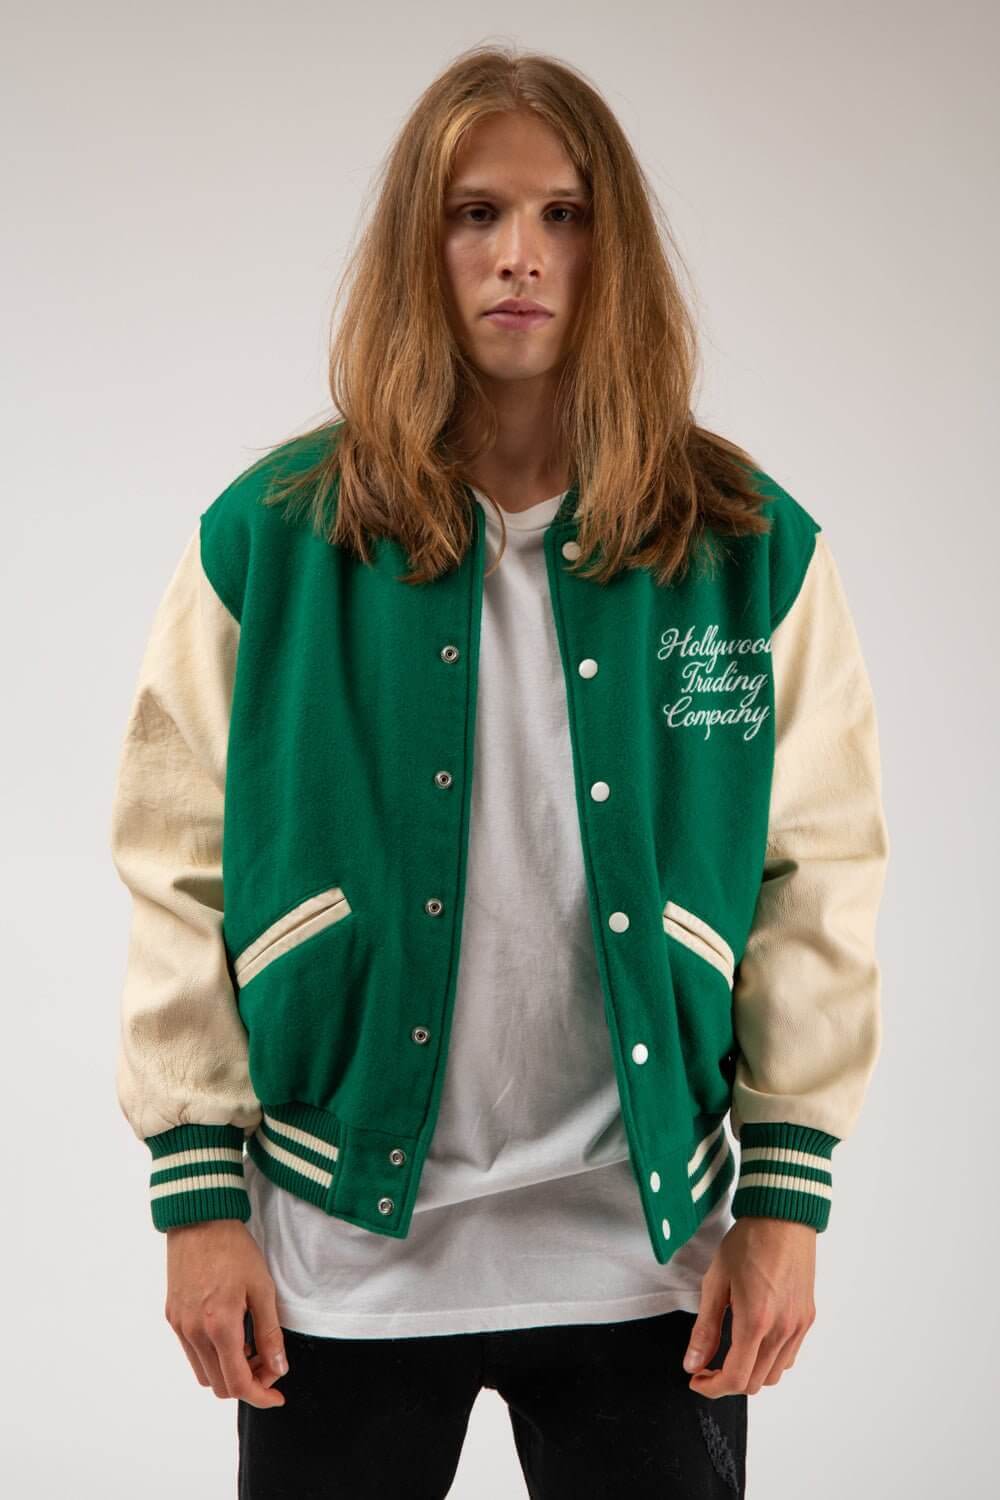 COLLEGE - EMBROIDERY MAN Varsity wool & leather bomber jacket. Front button closure, ribbed collar, cuffs and hem. Embroidered details. Two side pockets. Main body composition: 70% Wool, 30% Acrylic; sleeves: 100% Leather HTC LOS ANGELES